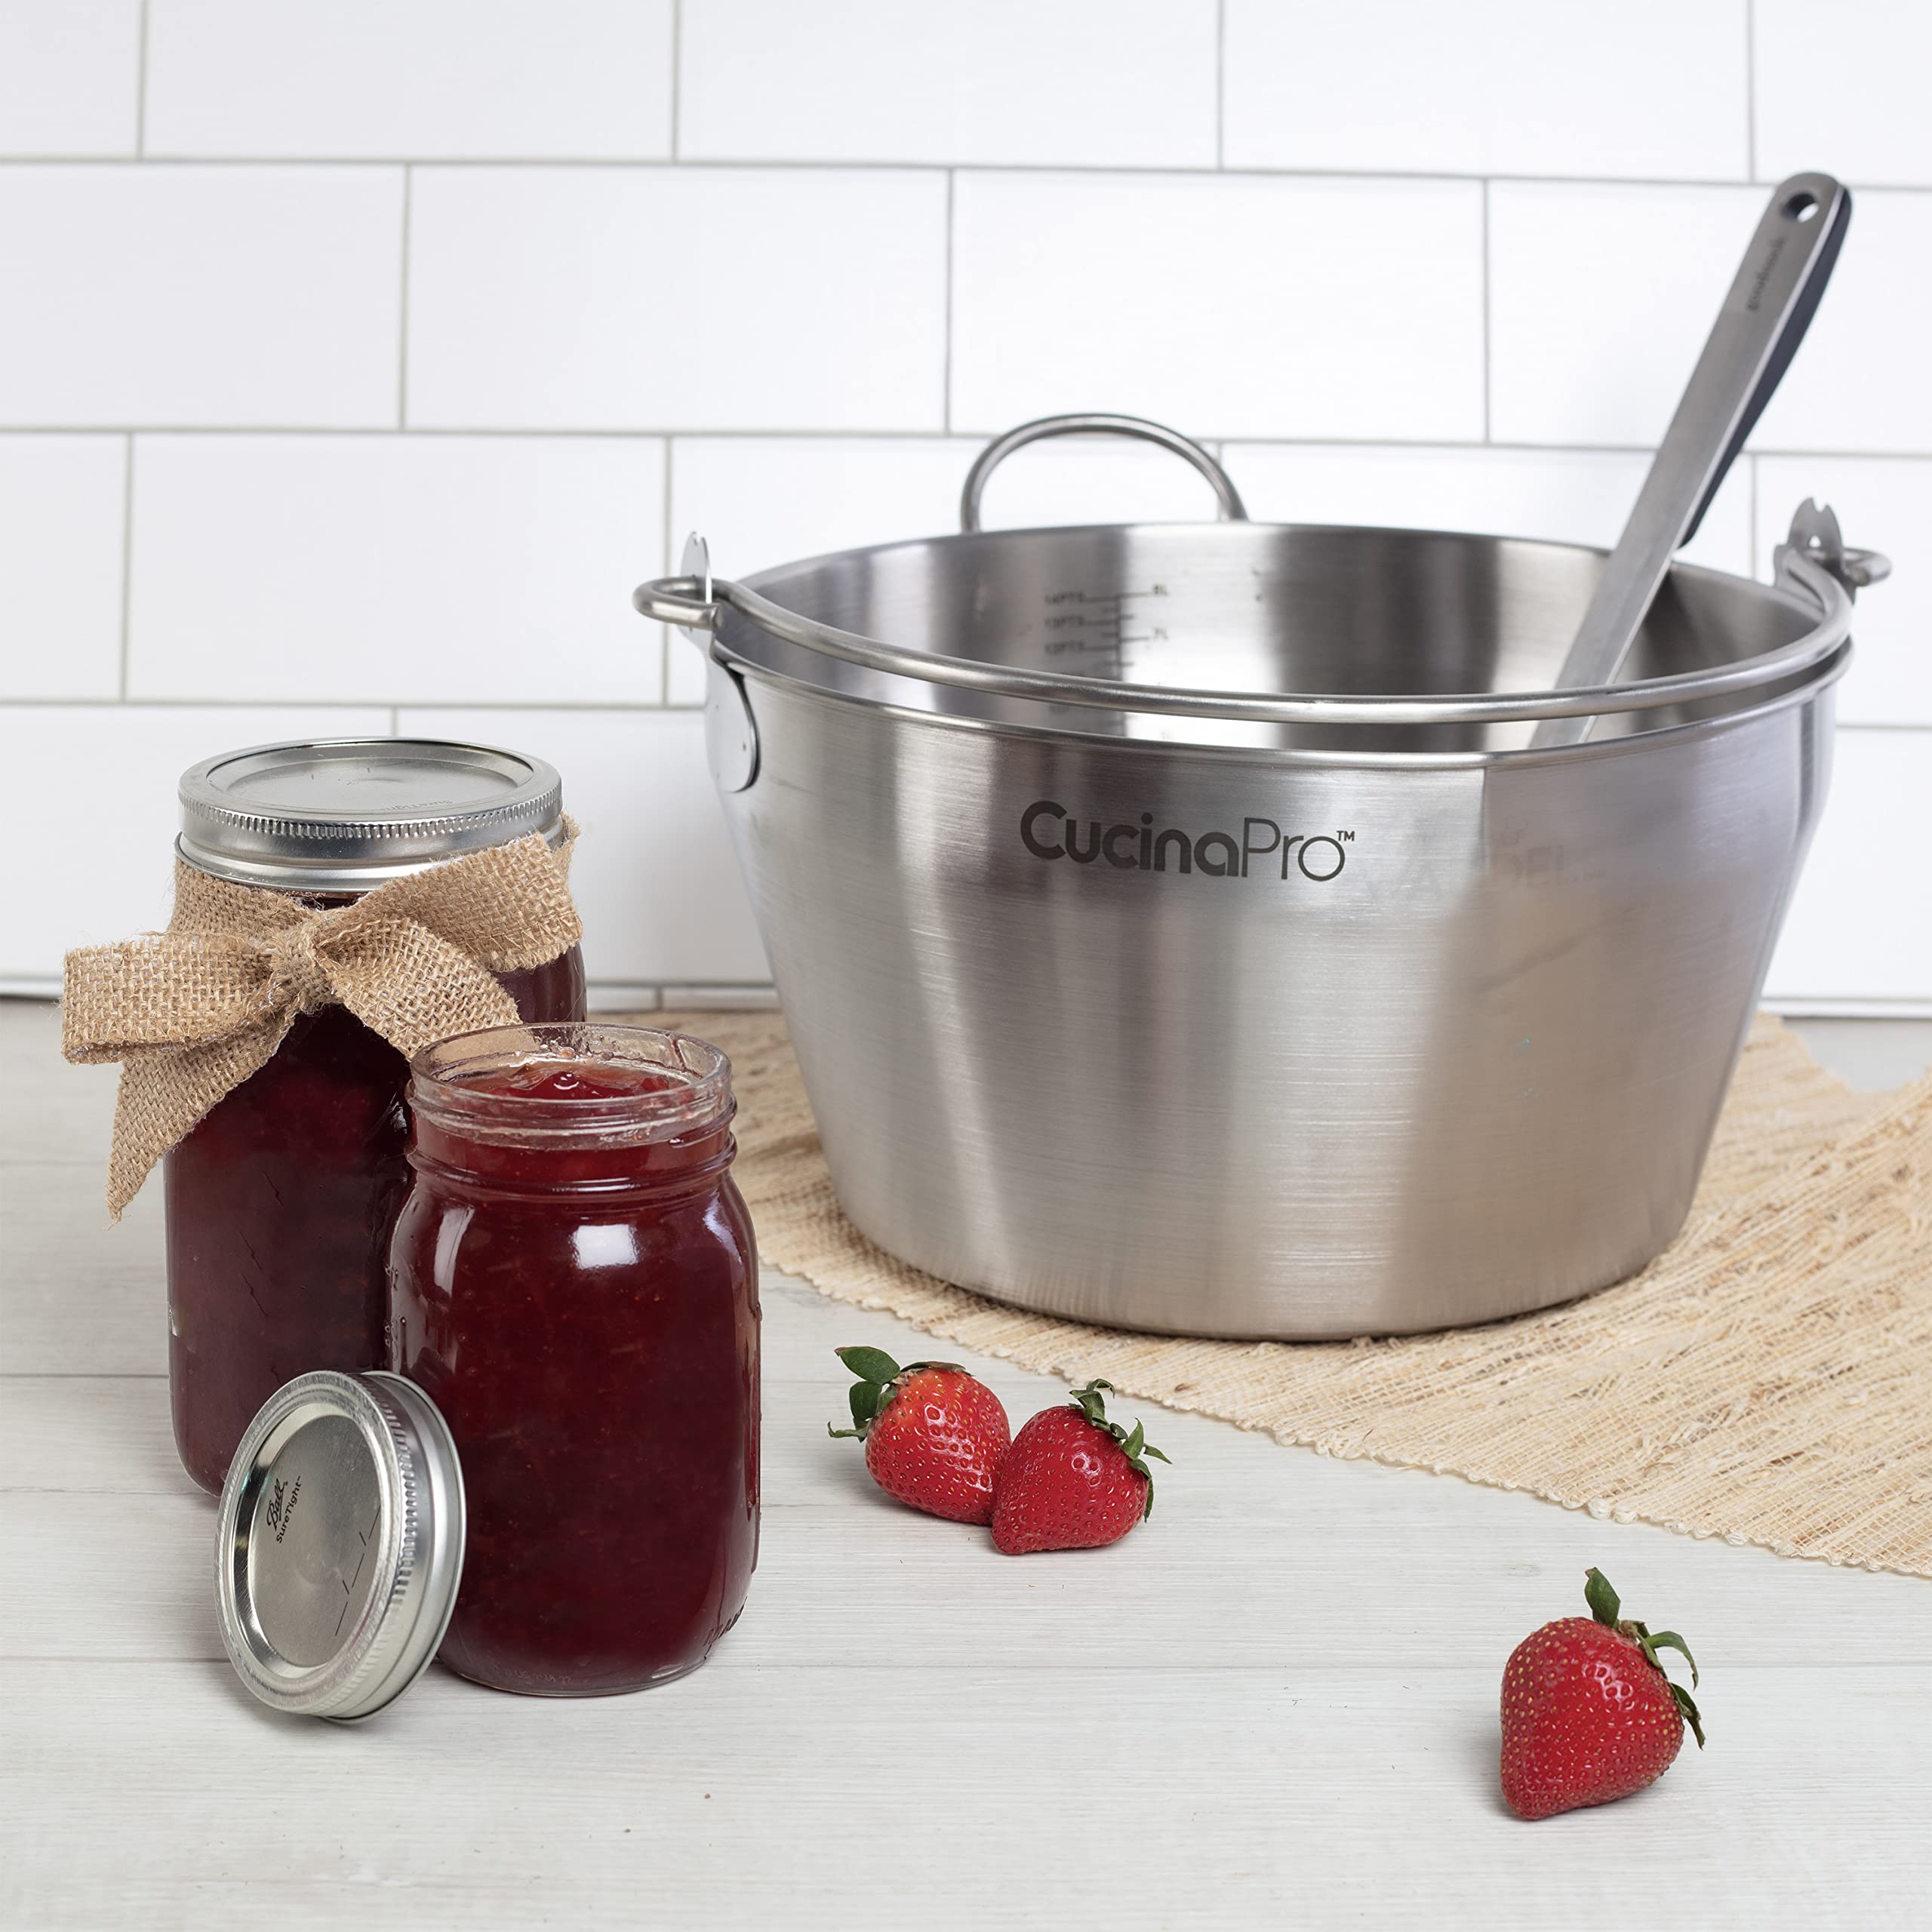 2 Gallon Stainless Steel Maslin Jam Pan, 8 Quarts- Pot includes Strainer Funnel Side Handle Pouring Spout- Graduated Concise Measuring Lines- Make Berry Jellies Jams Marmalades Sauce for Holiday Pies